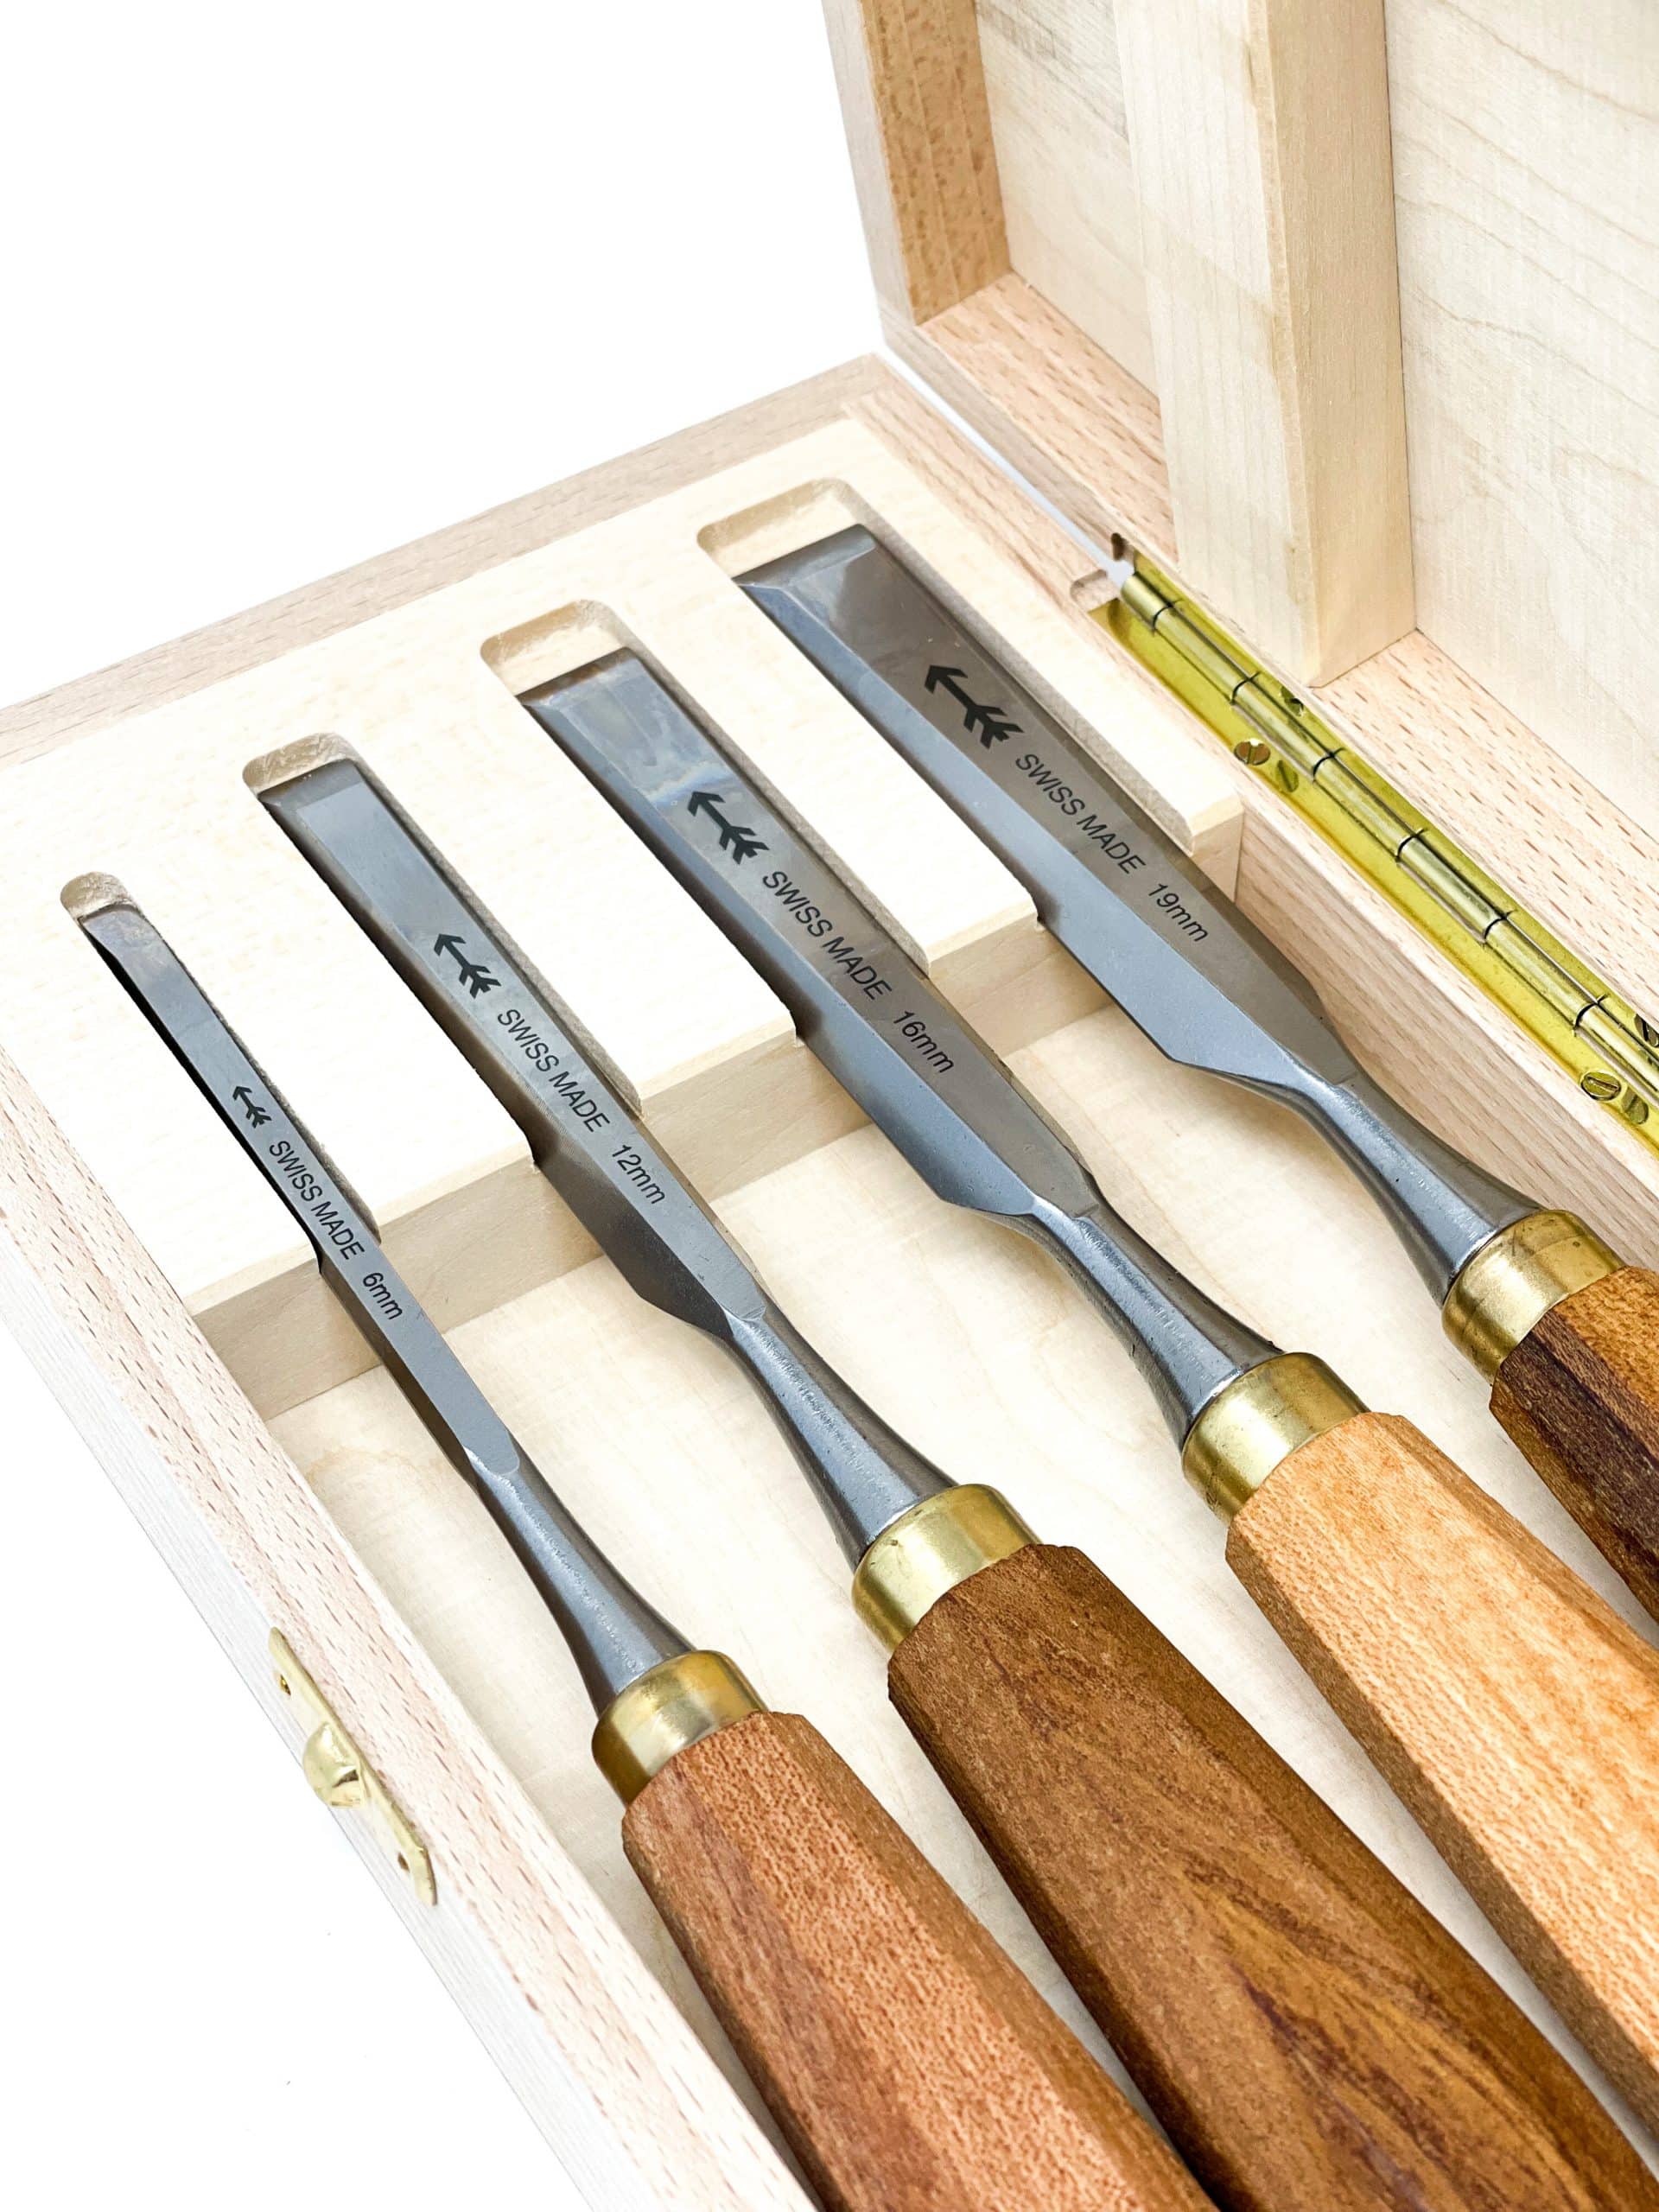 Wood Chisel Set 6 Piece for Woodworking, Professional for Mortising &  Carving, Forged Damascus Steel